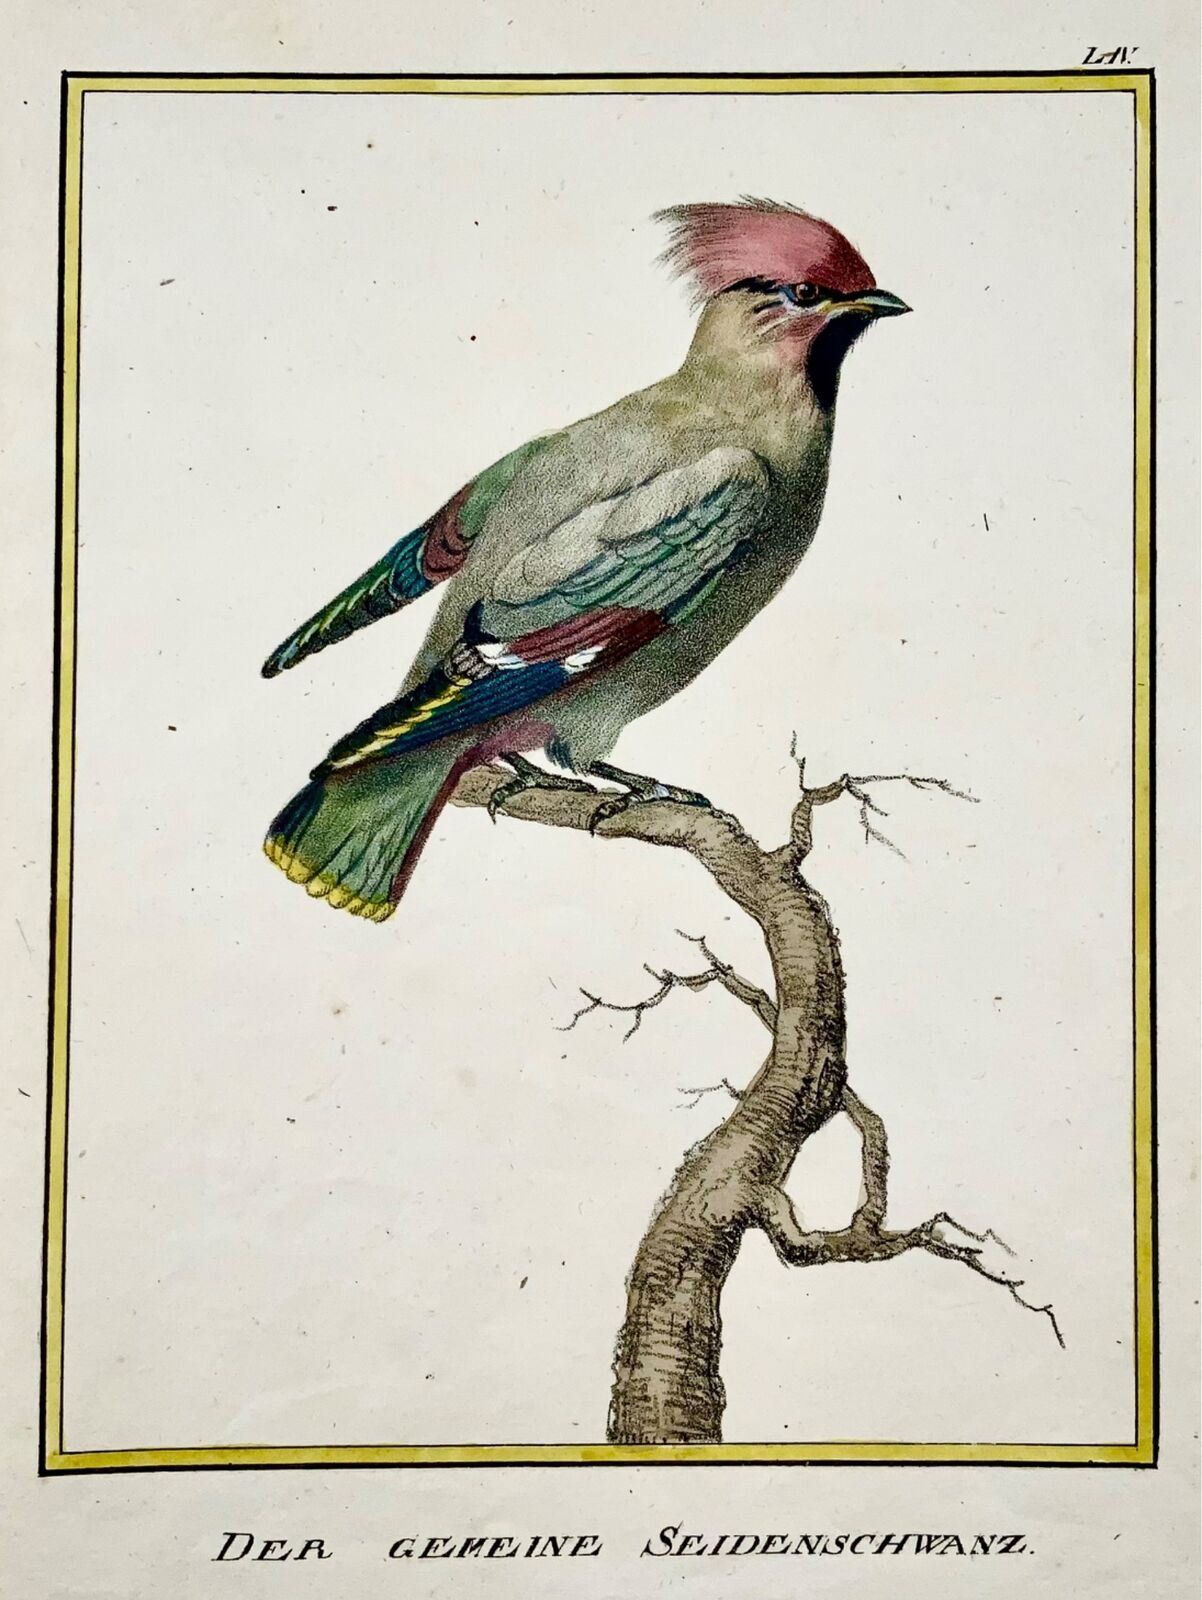 1816 Waxwing, ornithology, K. Schmidt, 4to hand color, incunabula of lithography